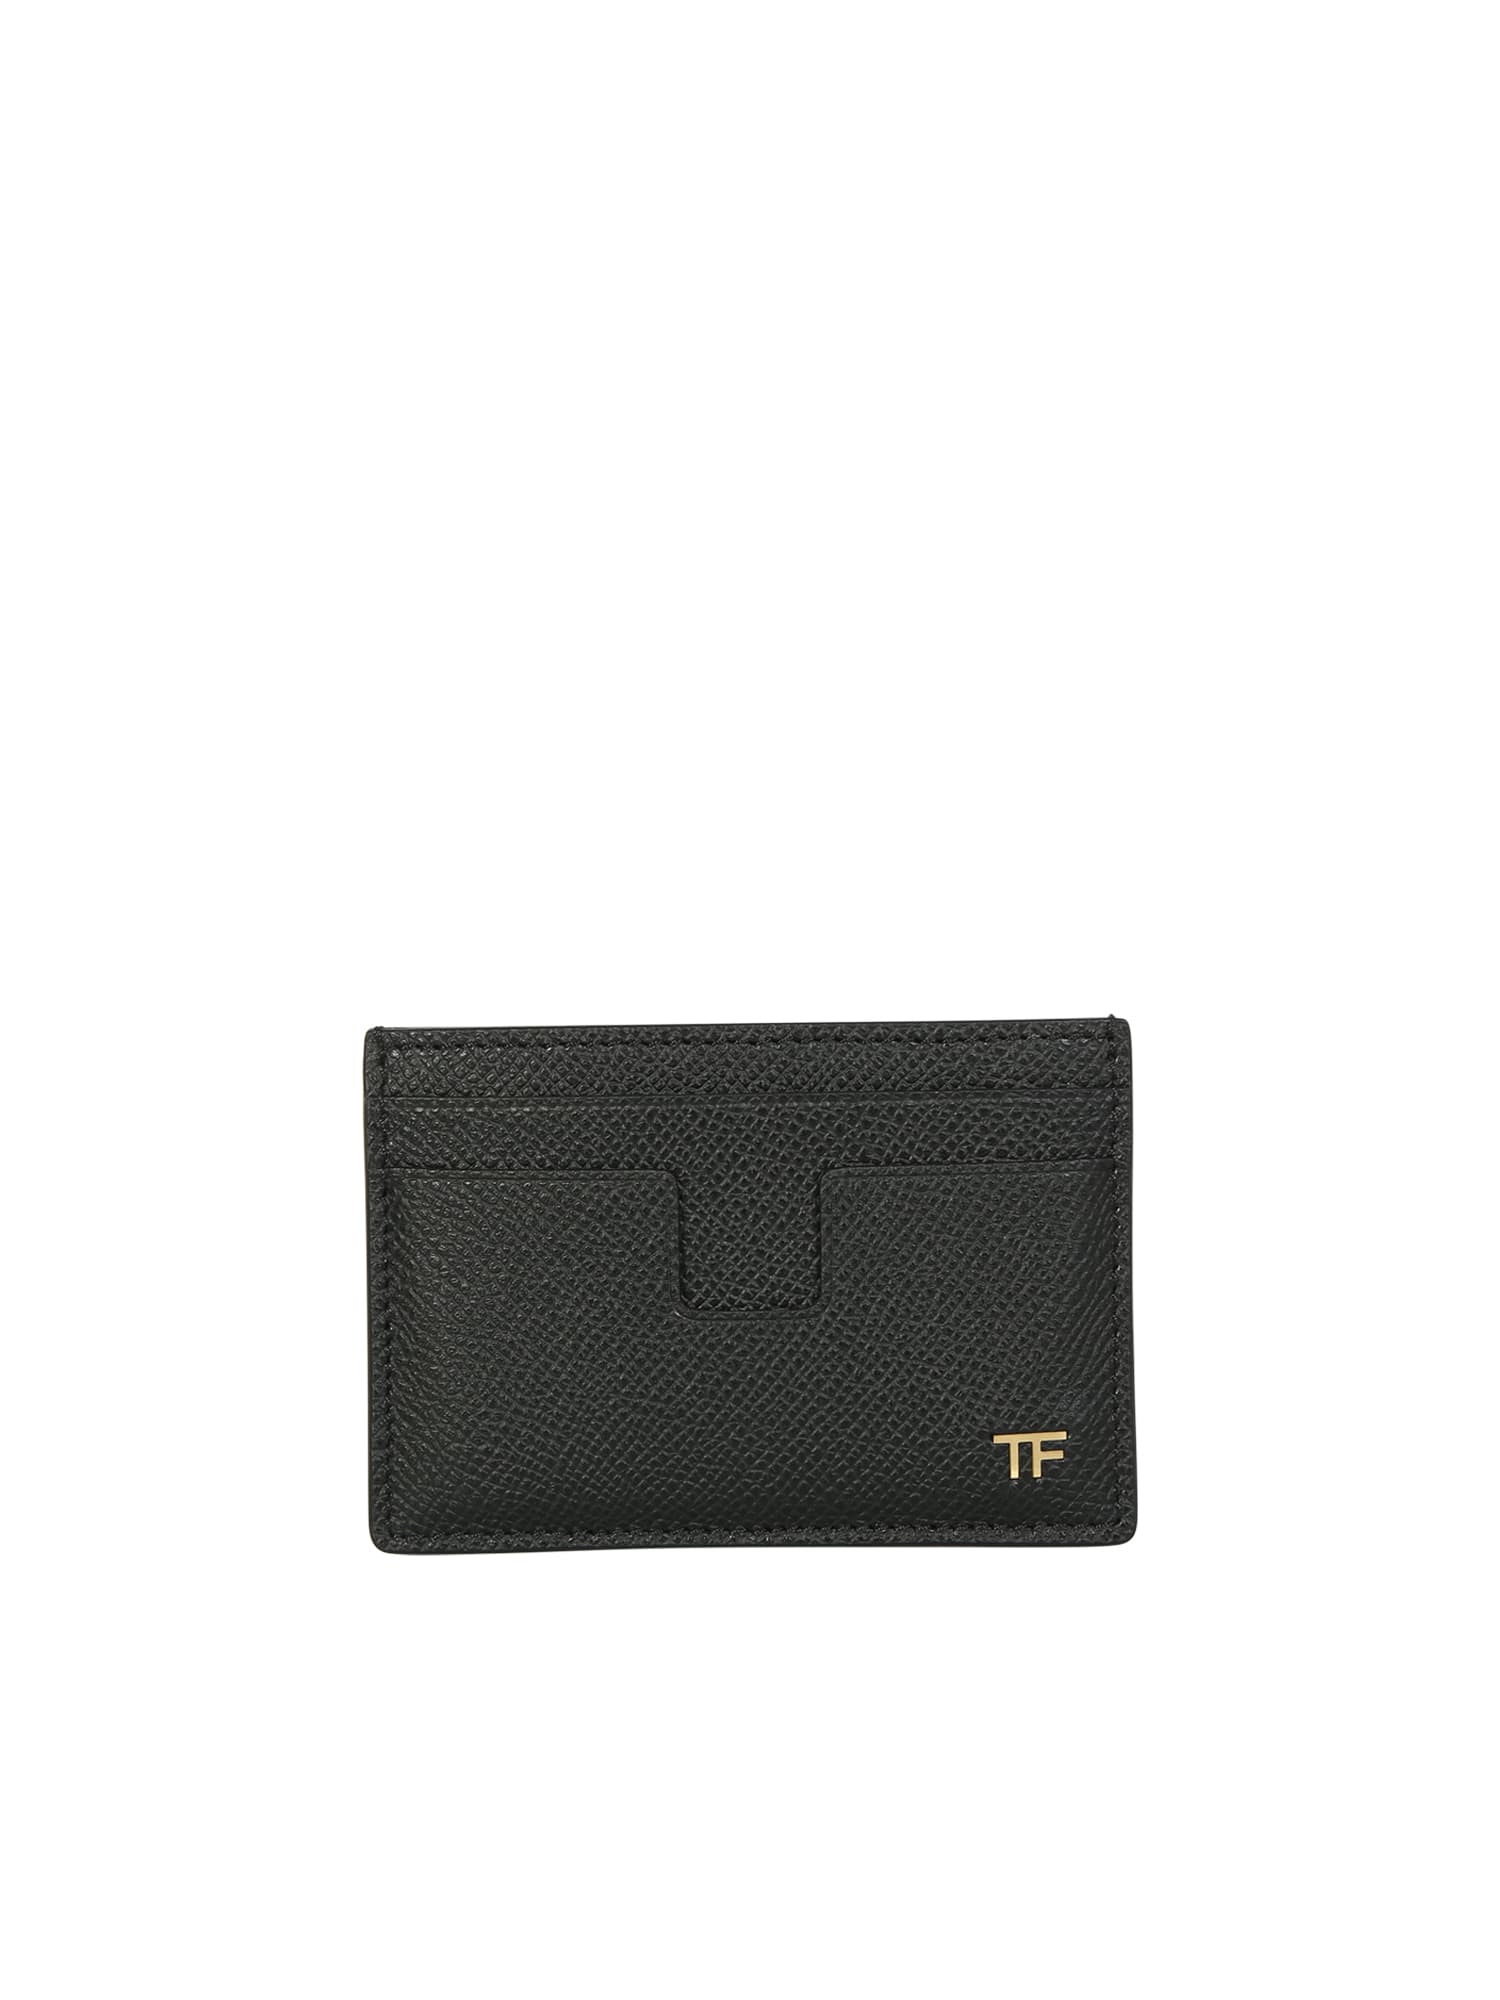 Tom Ford T Line Cardholder Is An Essential Accessory That Boasts An Italian Workmanship